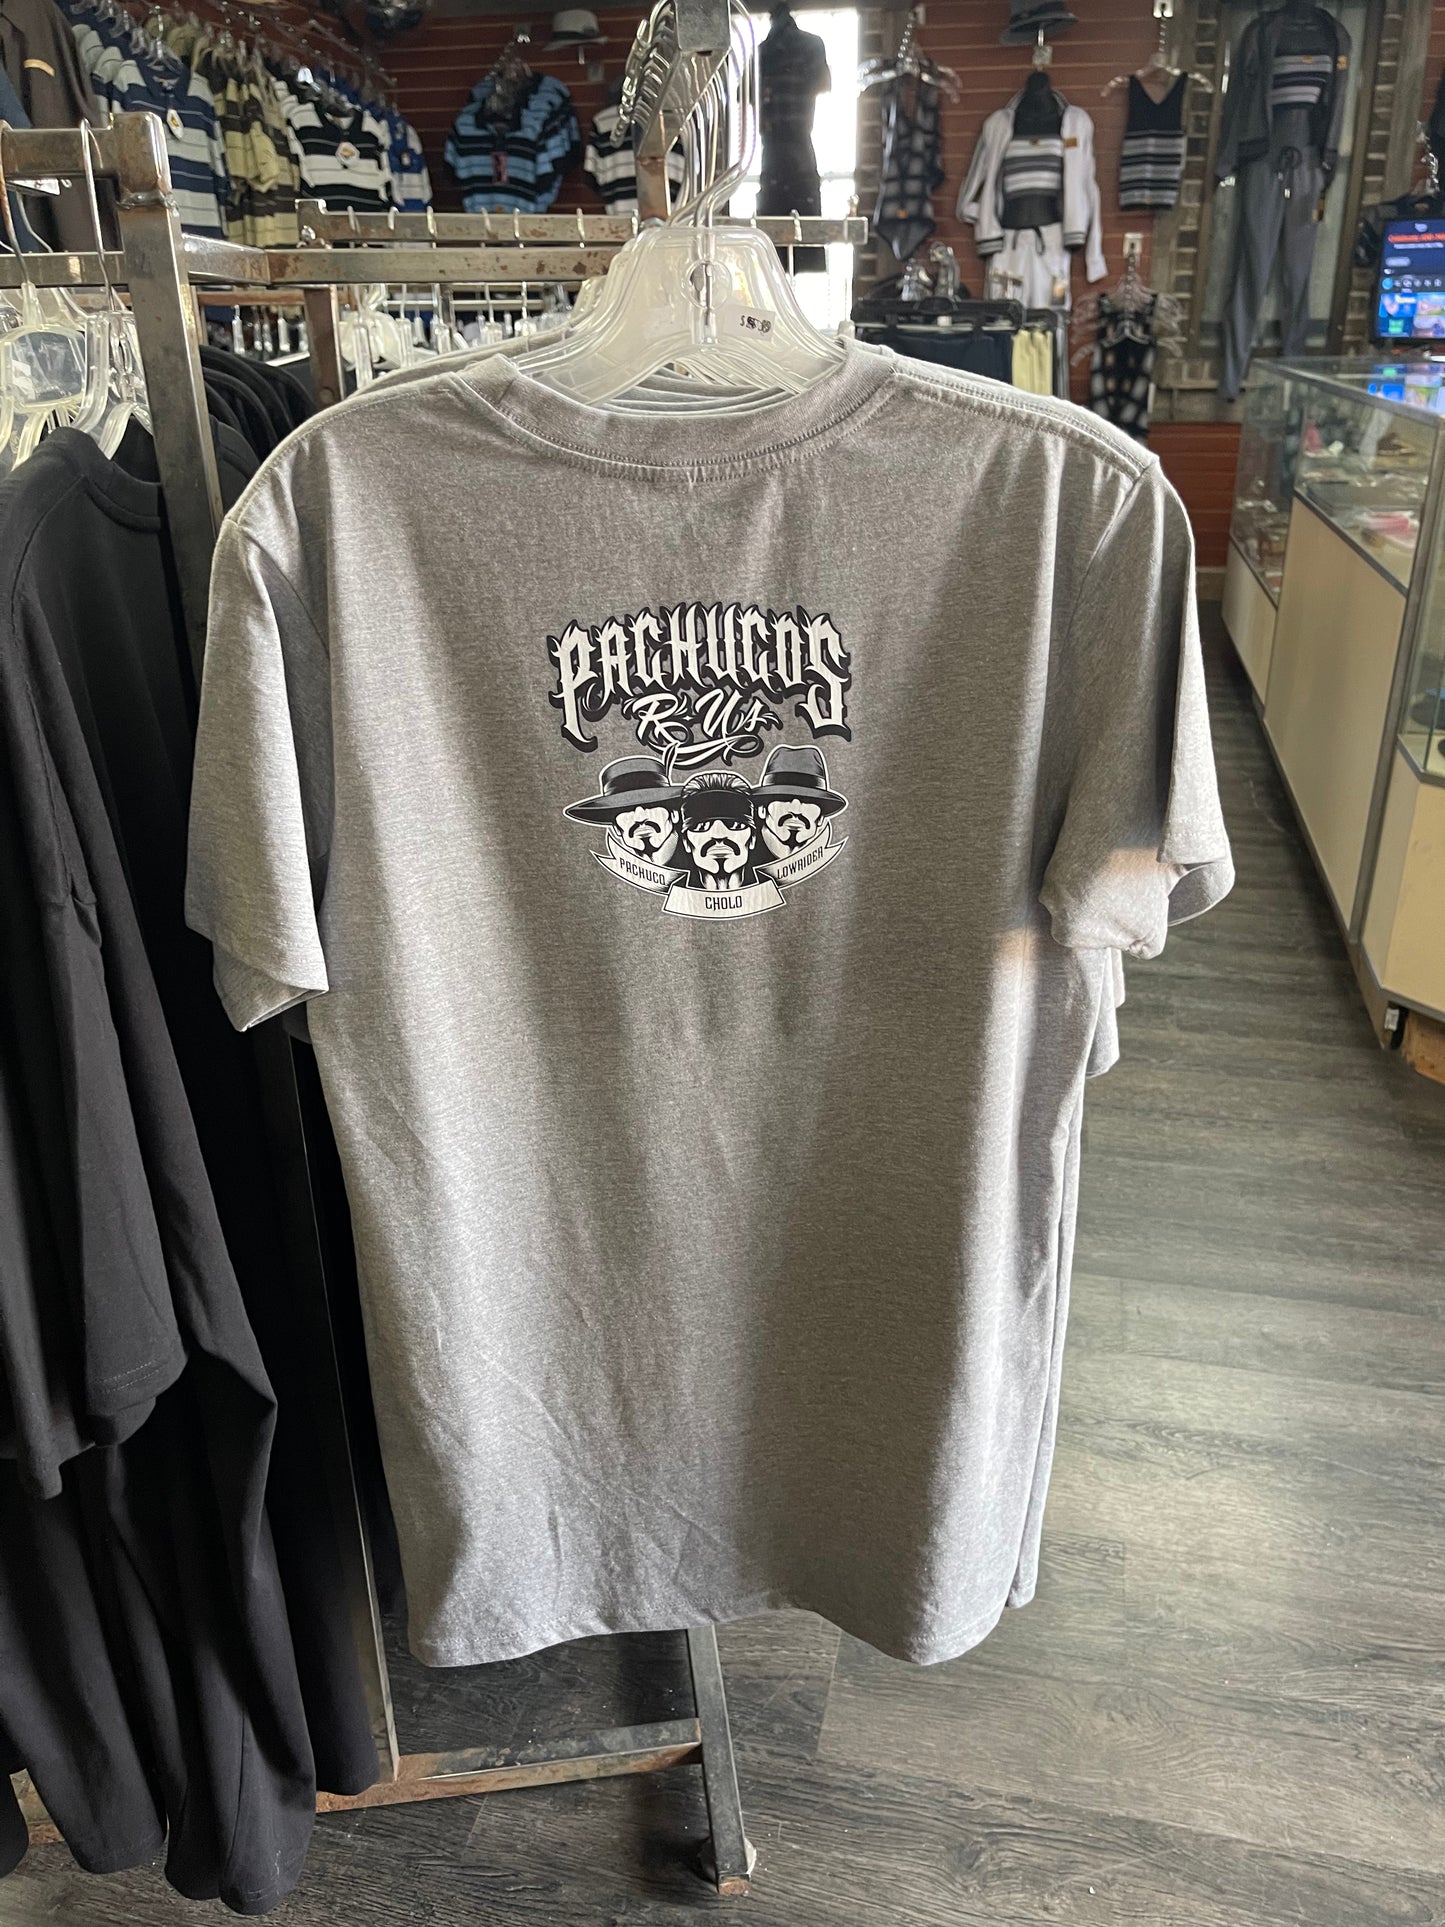 Pachucos R Us Tee (Blk & Grey) Limited Edition